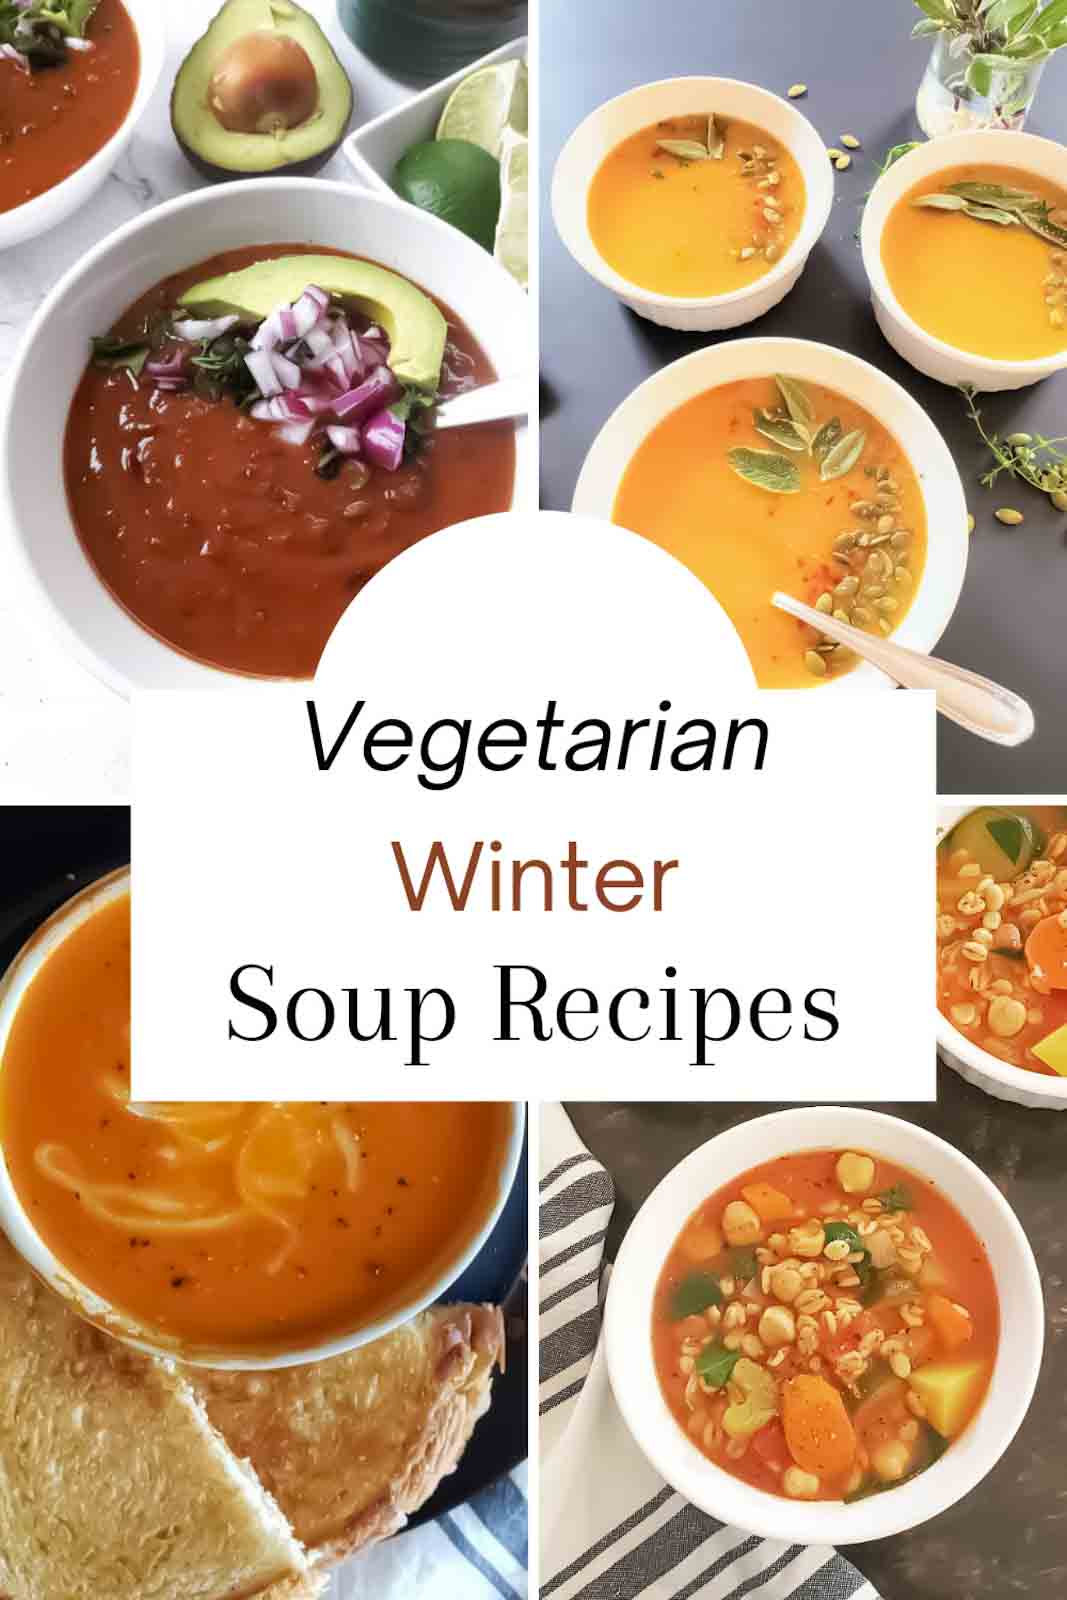 Pinterest collage with text overlay for Vegetarian Winter Soup Recipes.